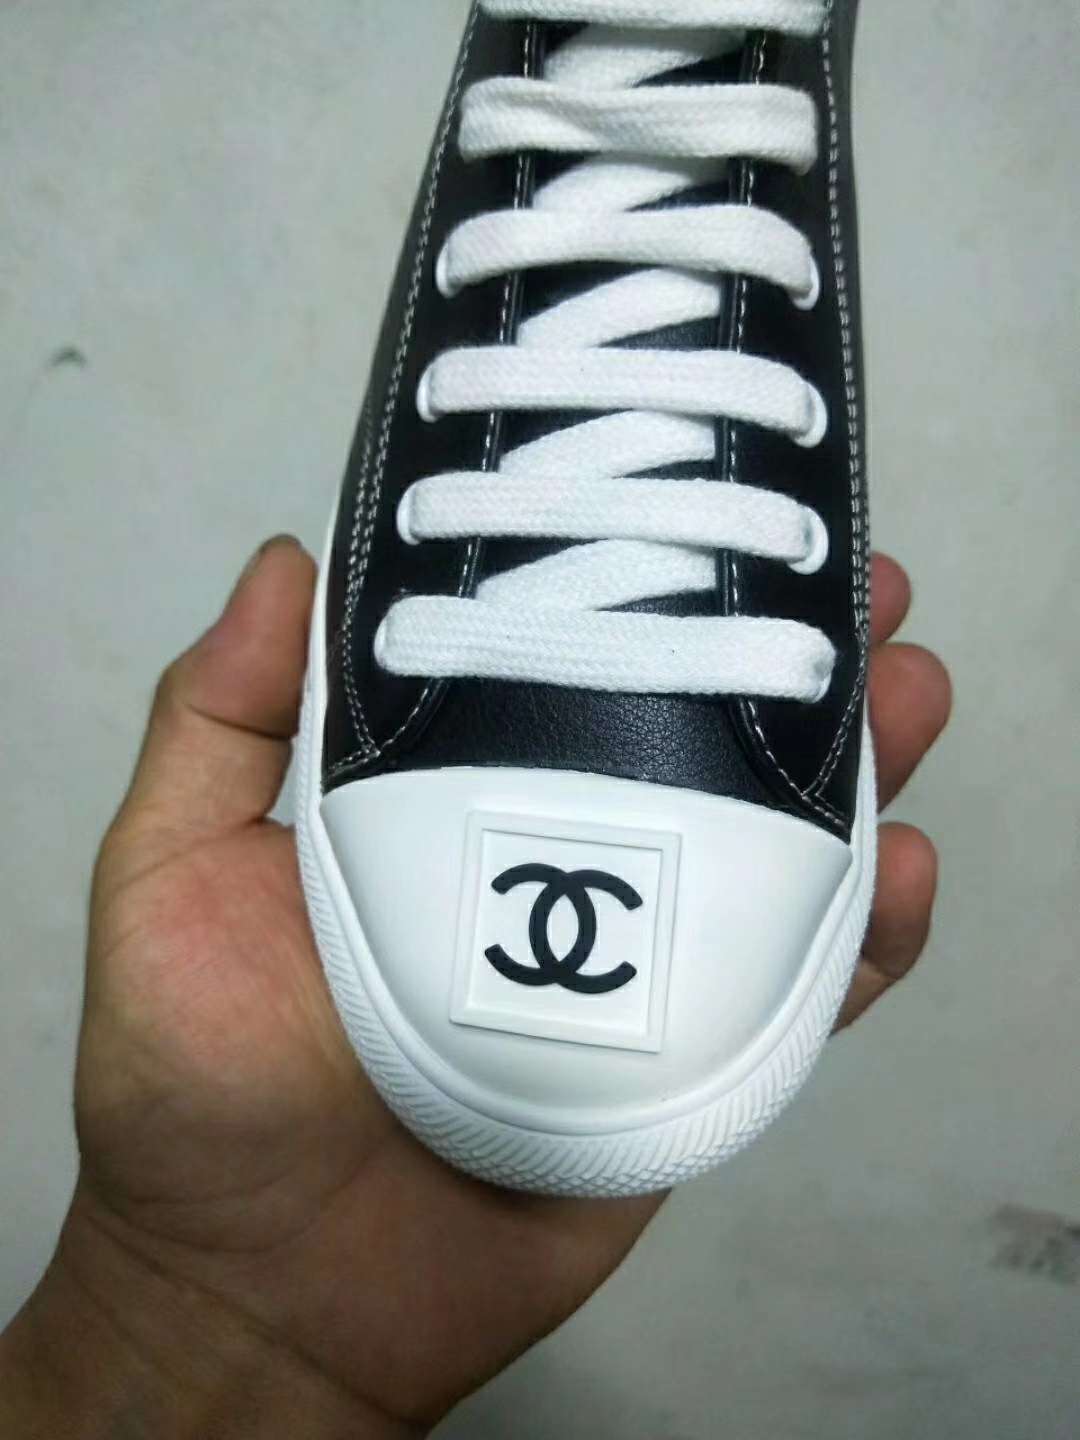 2019 NEW Chanel Real leather shoes 1026 black white - Click Image to Close